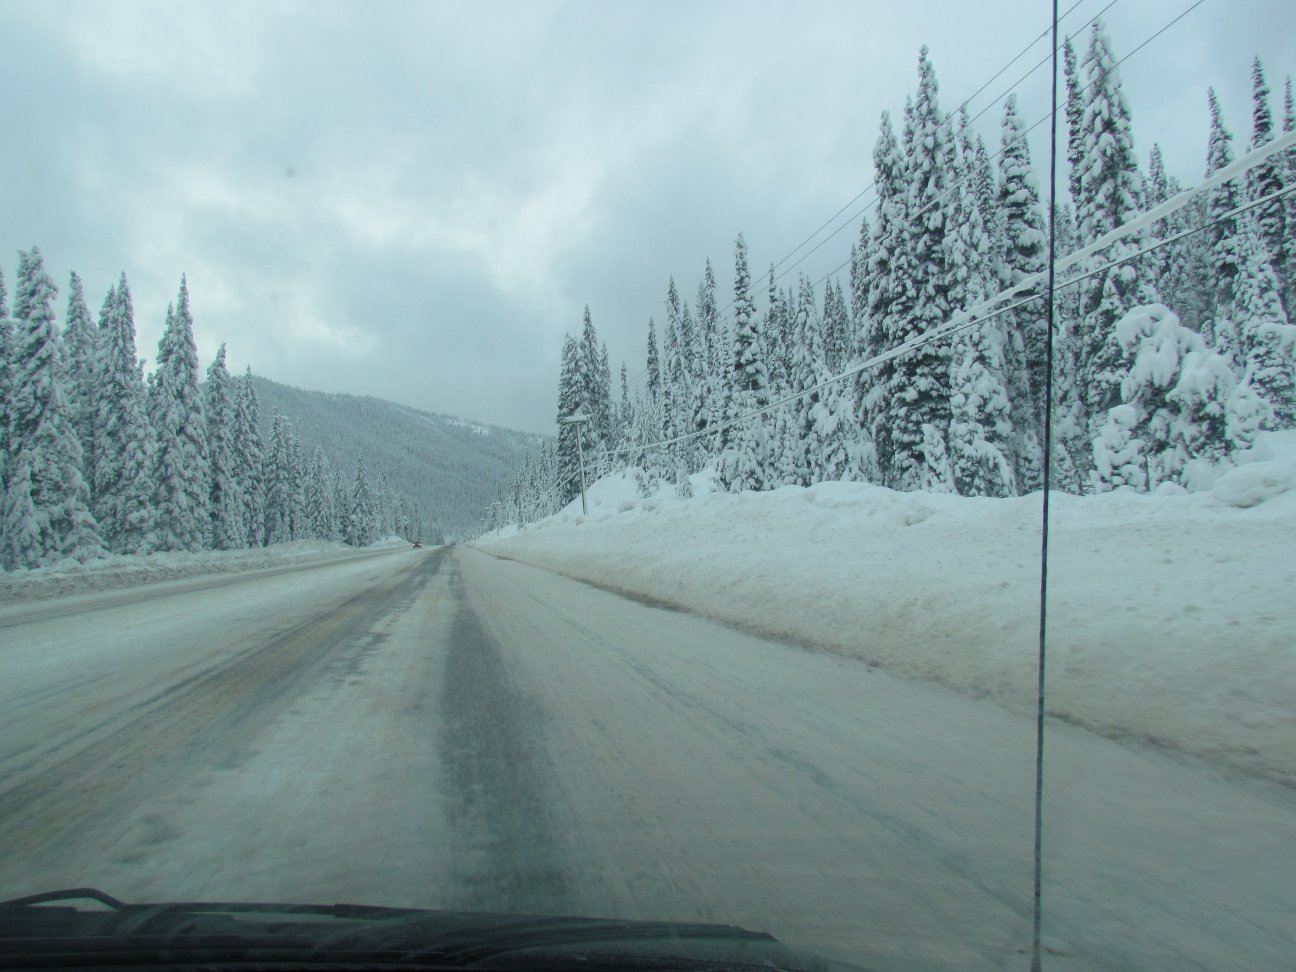 2012 BC Drive winter conditions over the Hope Princeton
        Highway